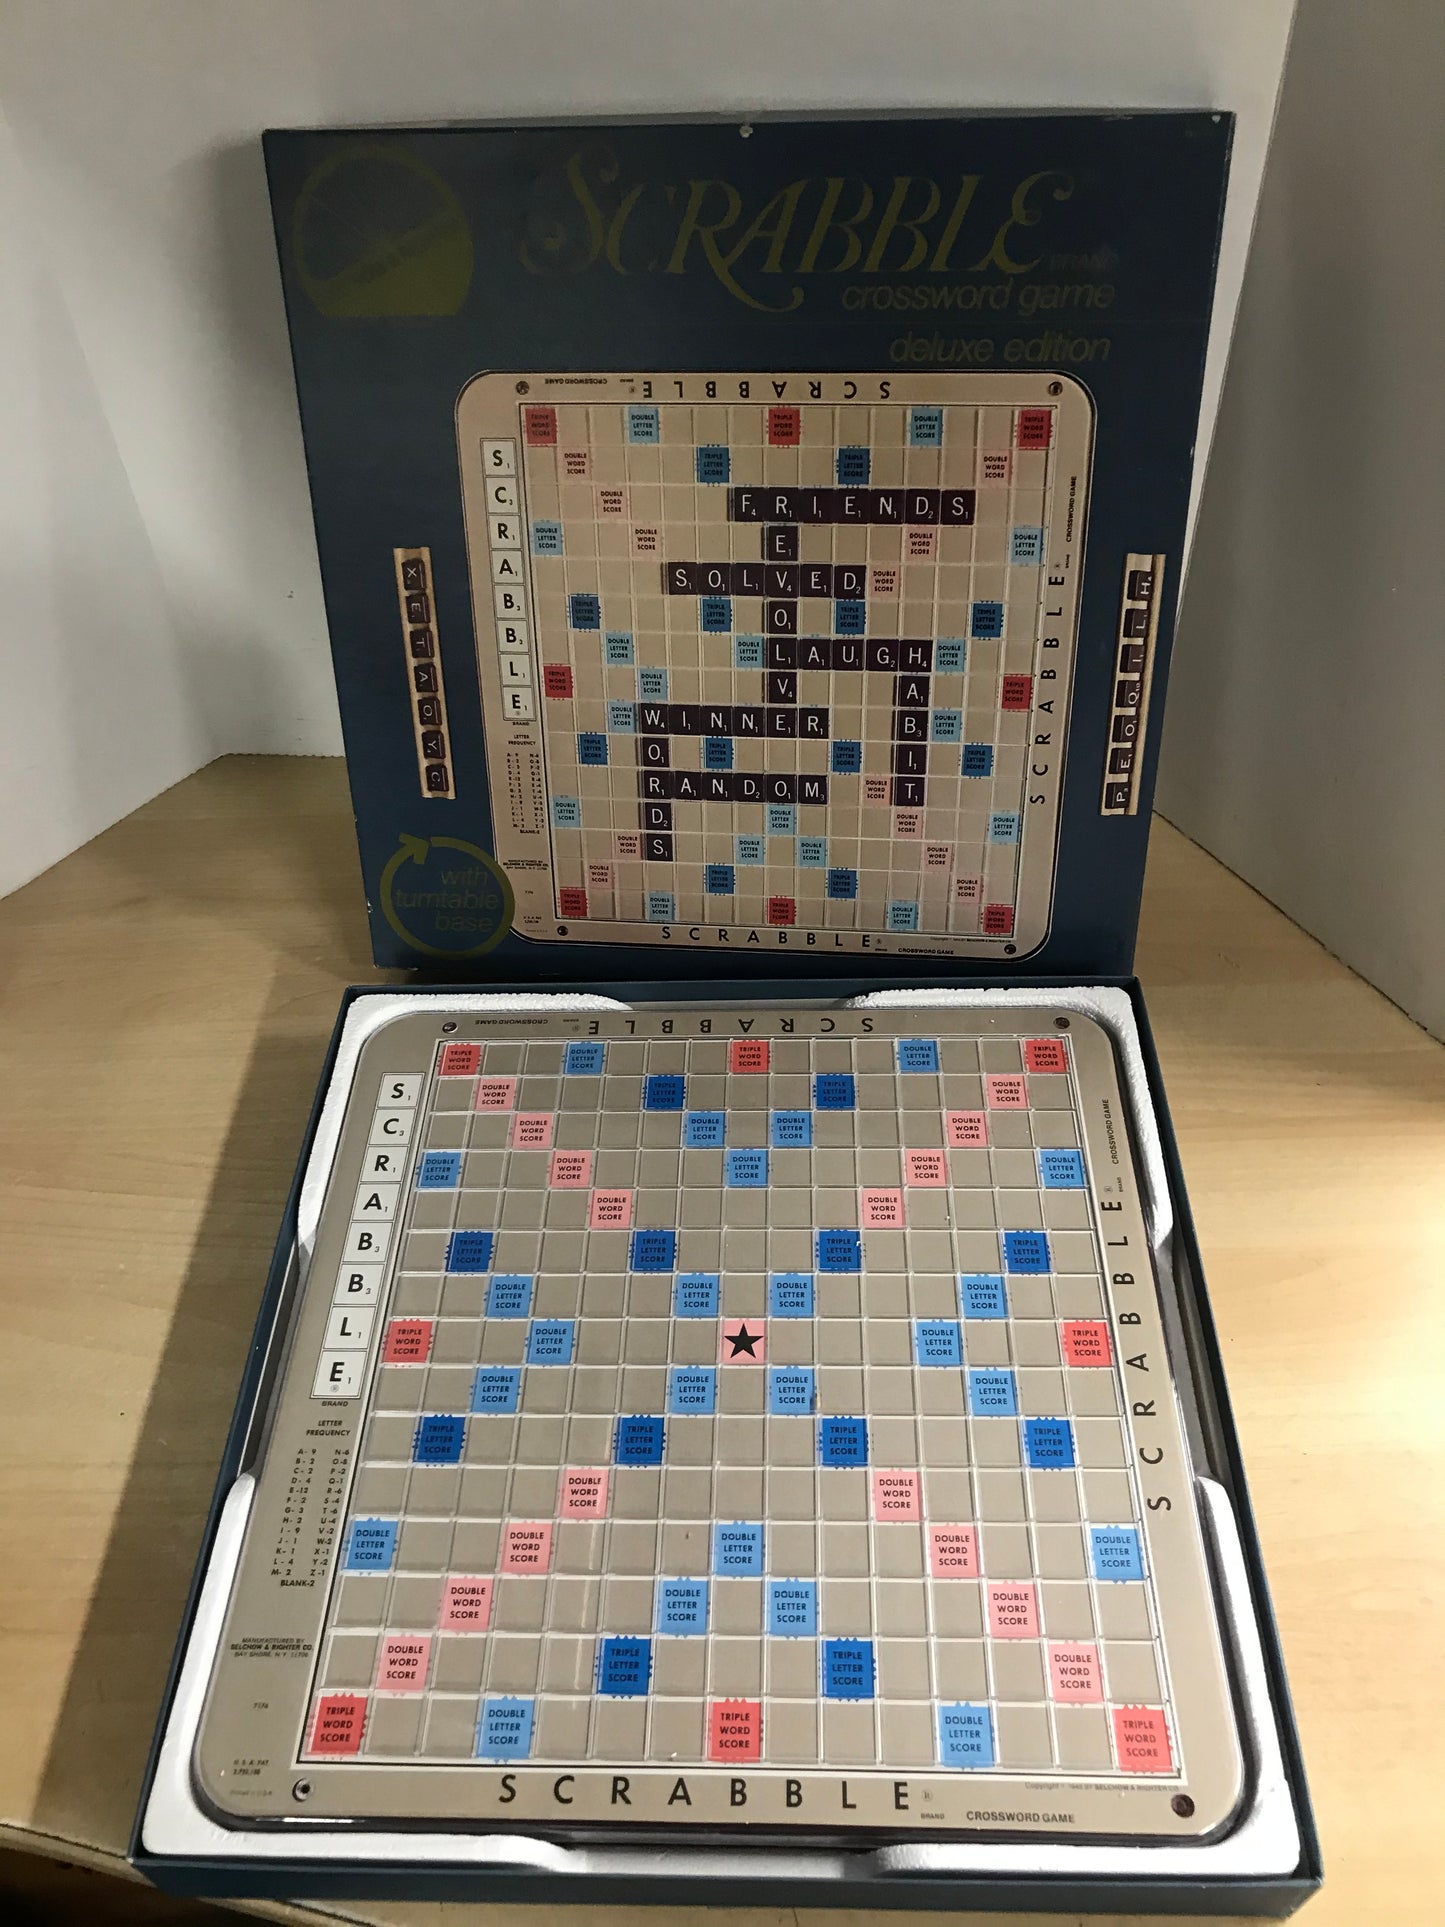 Game 1982 Vintage Scrabble Deluxe Edition No 71 With Turntable Base Selchow & Righter RARE As New Complete